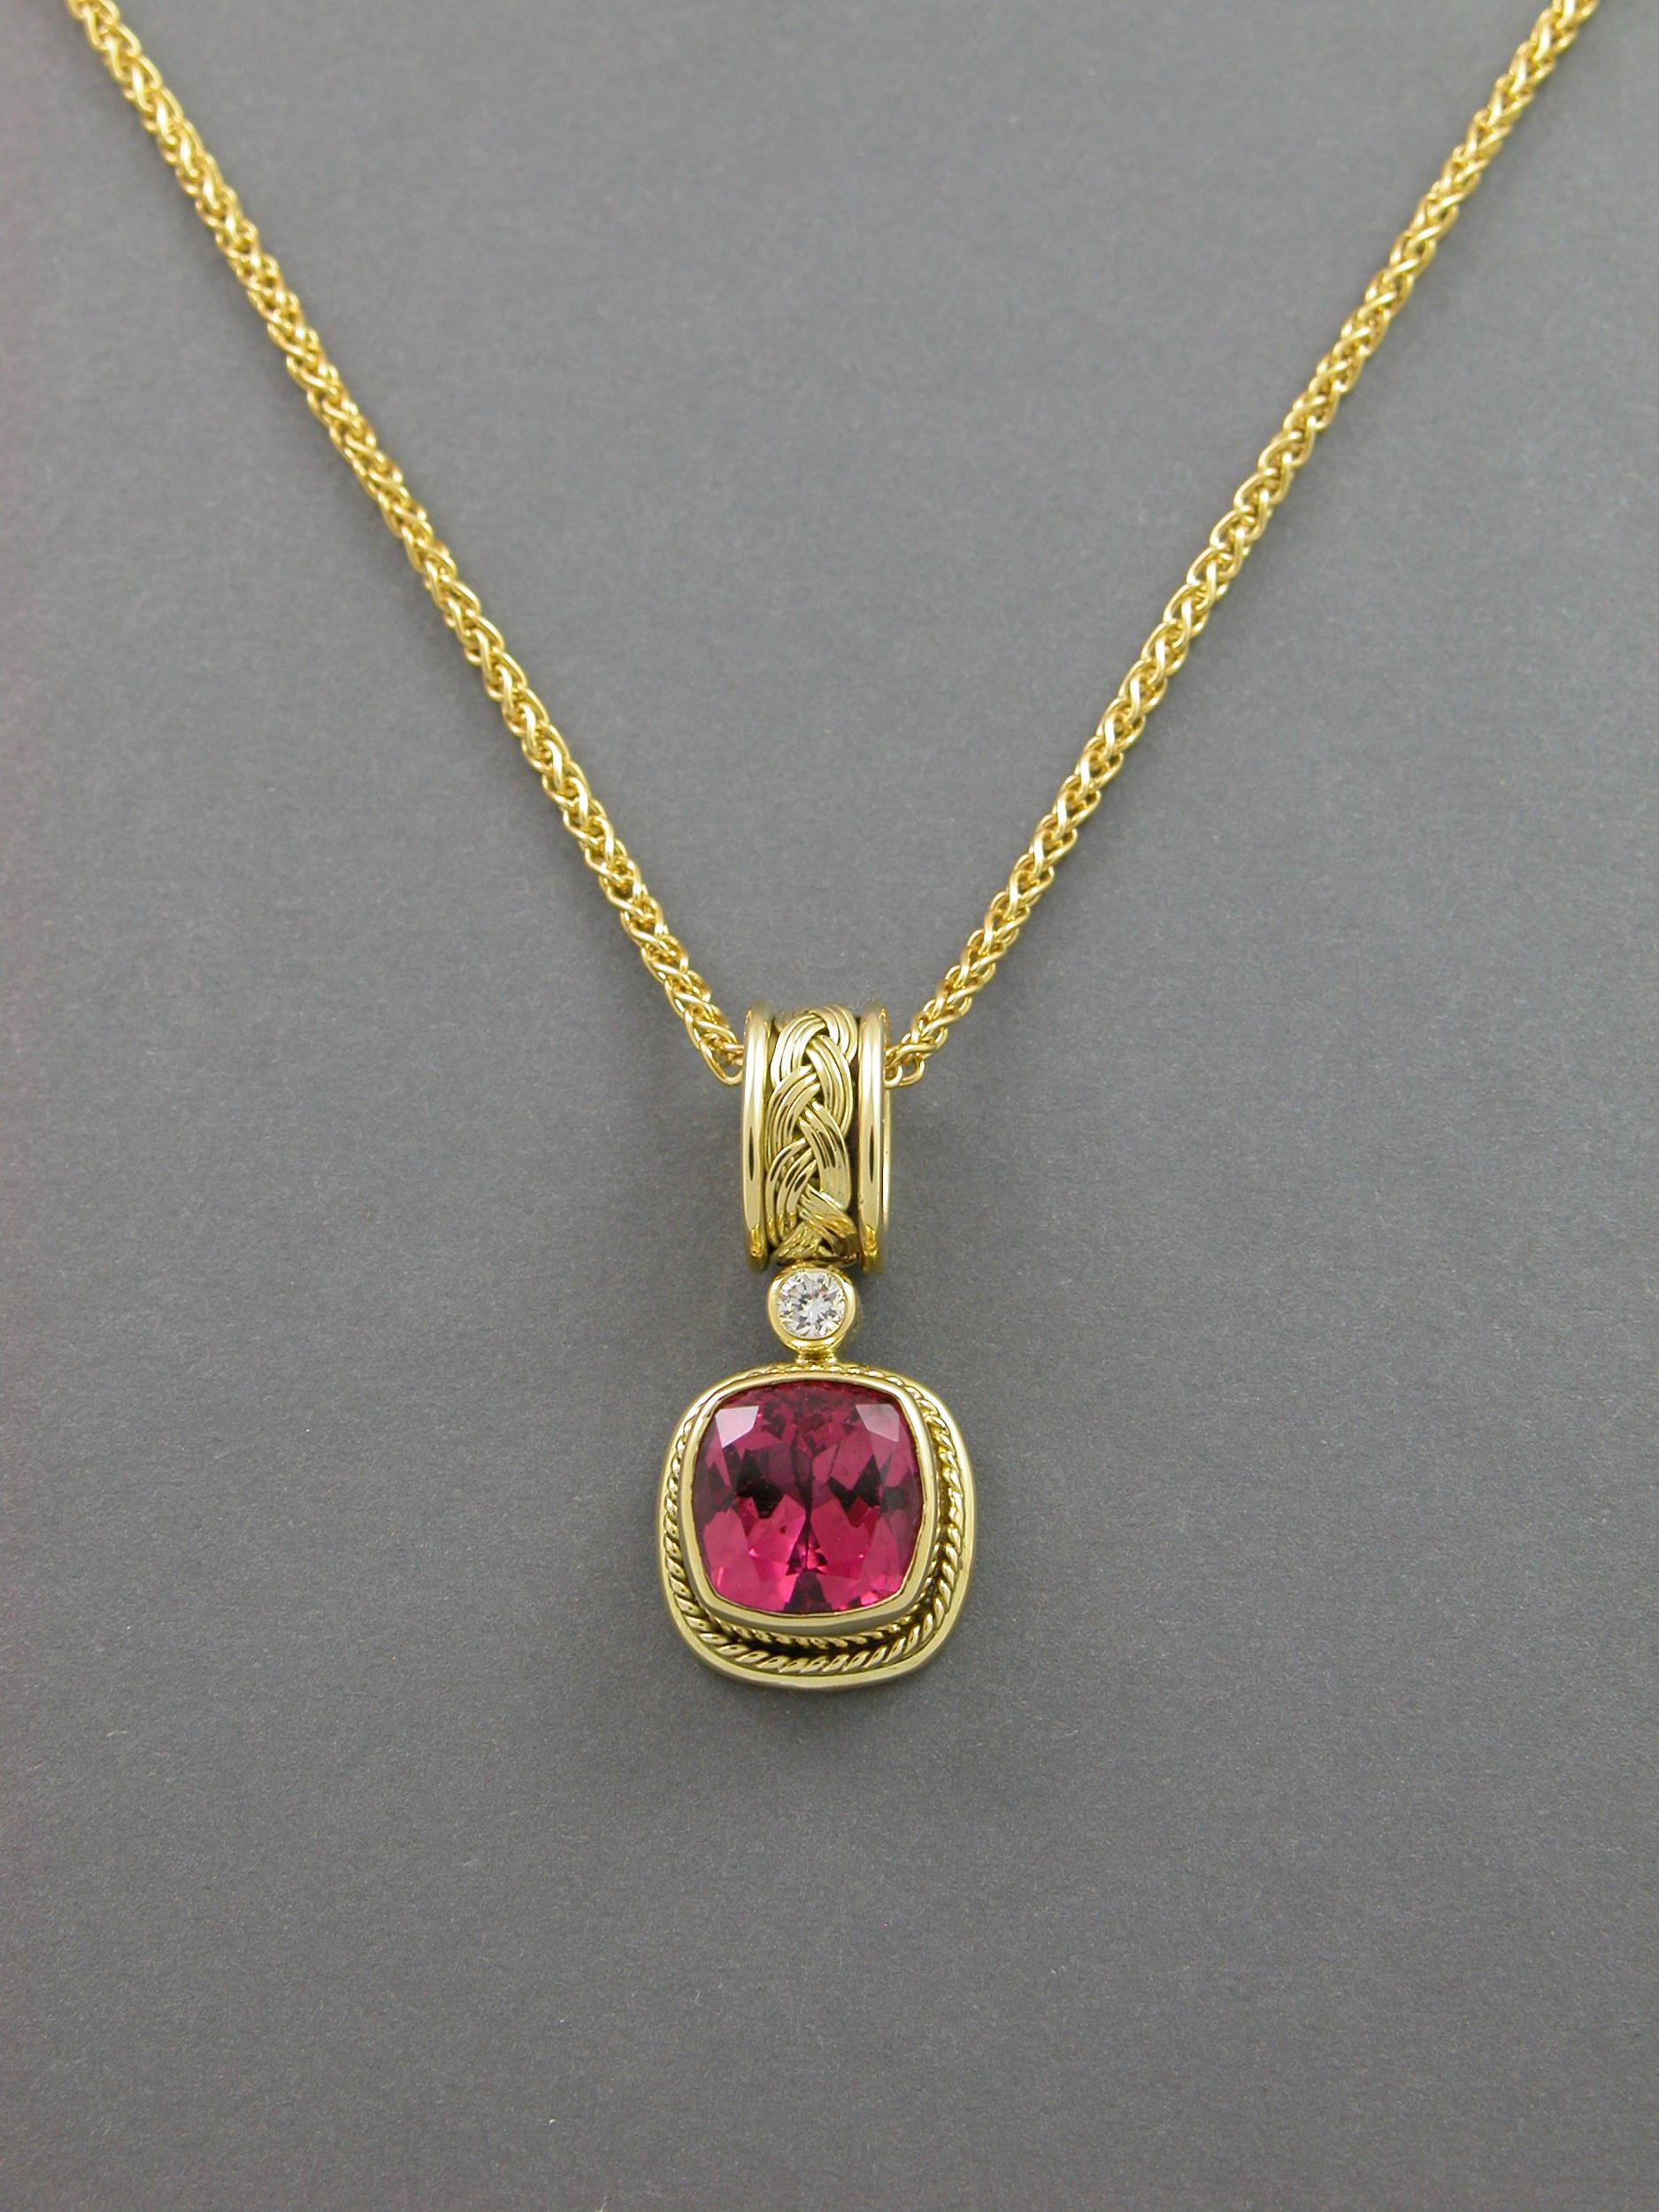 Adorn yourself with this exquisite pink tourmaline and 18k pendant accented with a brilliant white diamond hand fabricated by Lynn Kathyrn Miller, owner of Lynn K Designs. 
Faceted to perfection, the 3.54 carat cushion cut deeply saturated pink